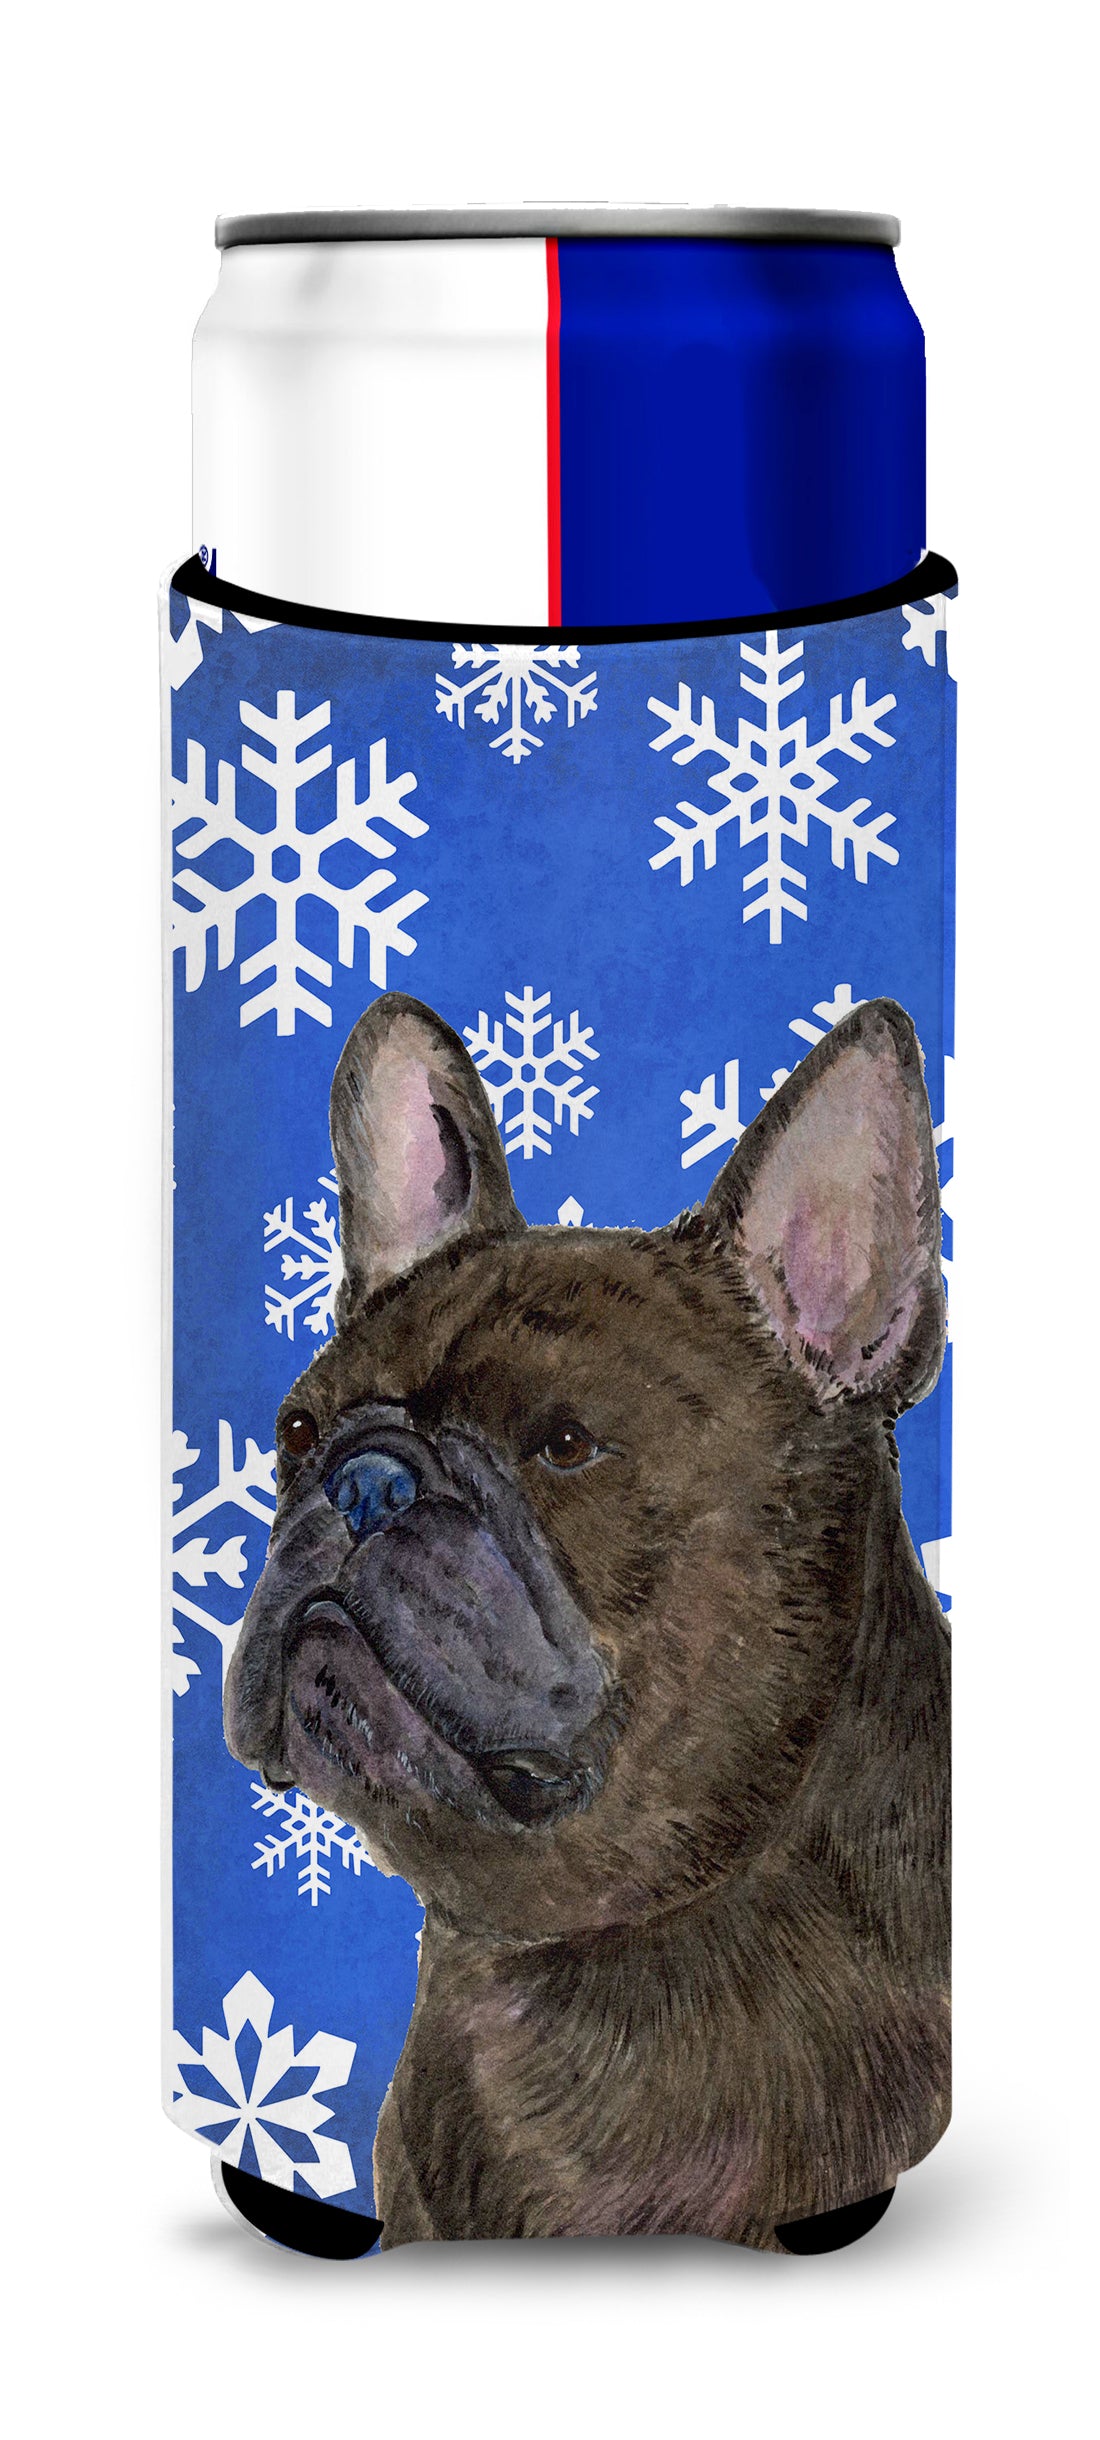 French Bulldog Winter Snowflakes Holiday Ultra Beverage Insulators for slim cans SS4657MUK.